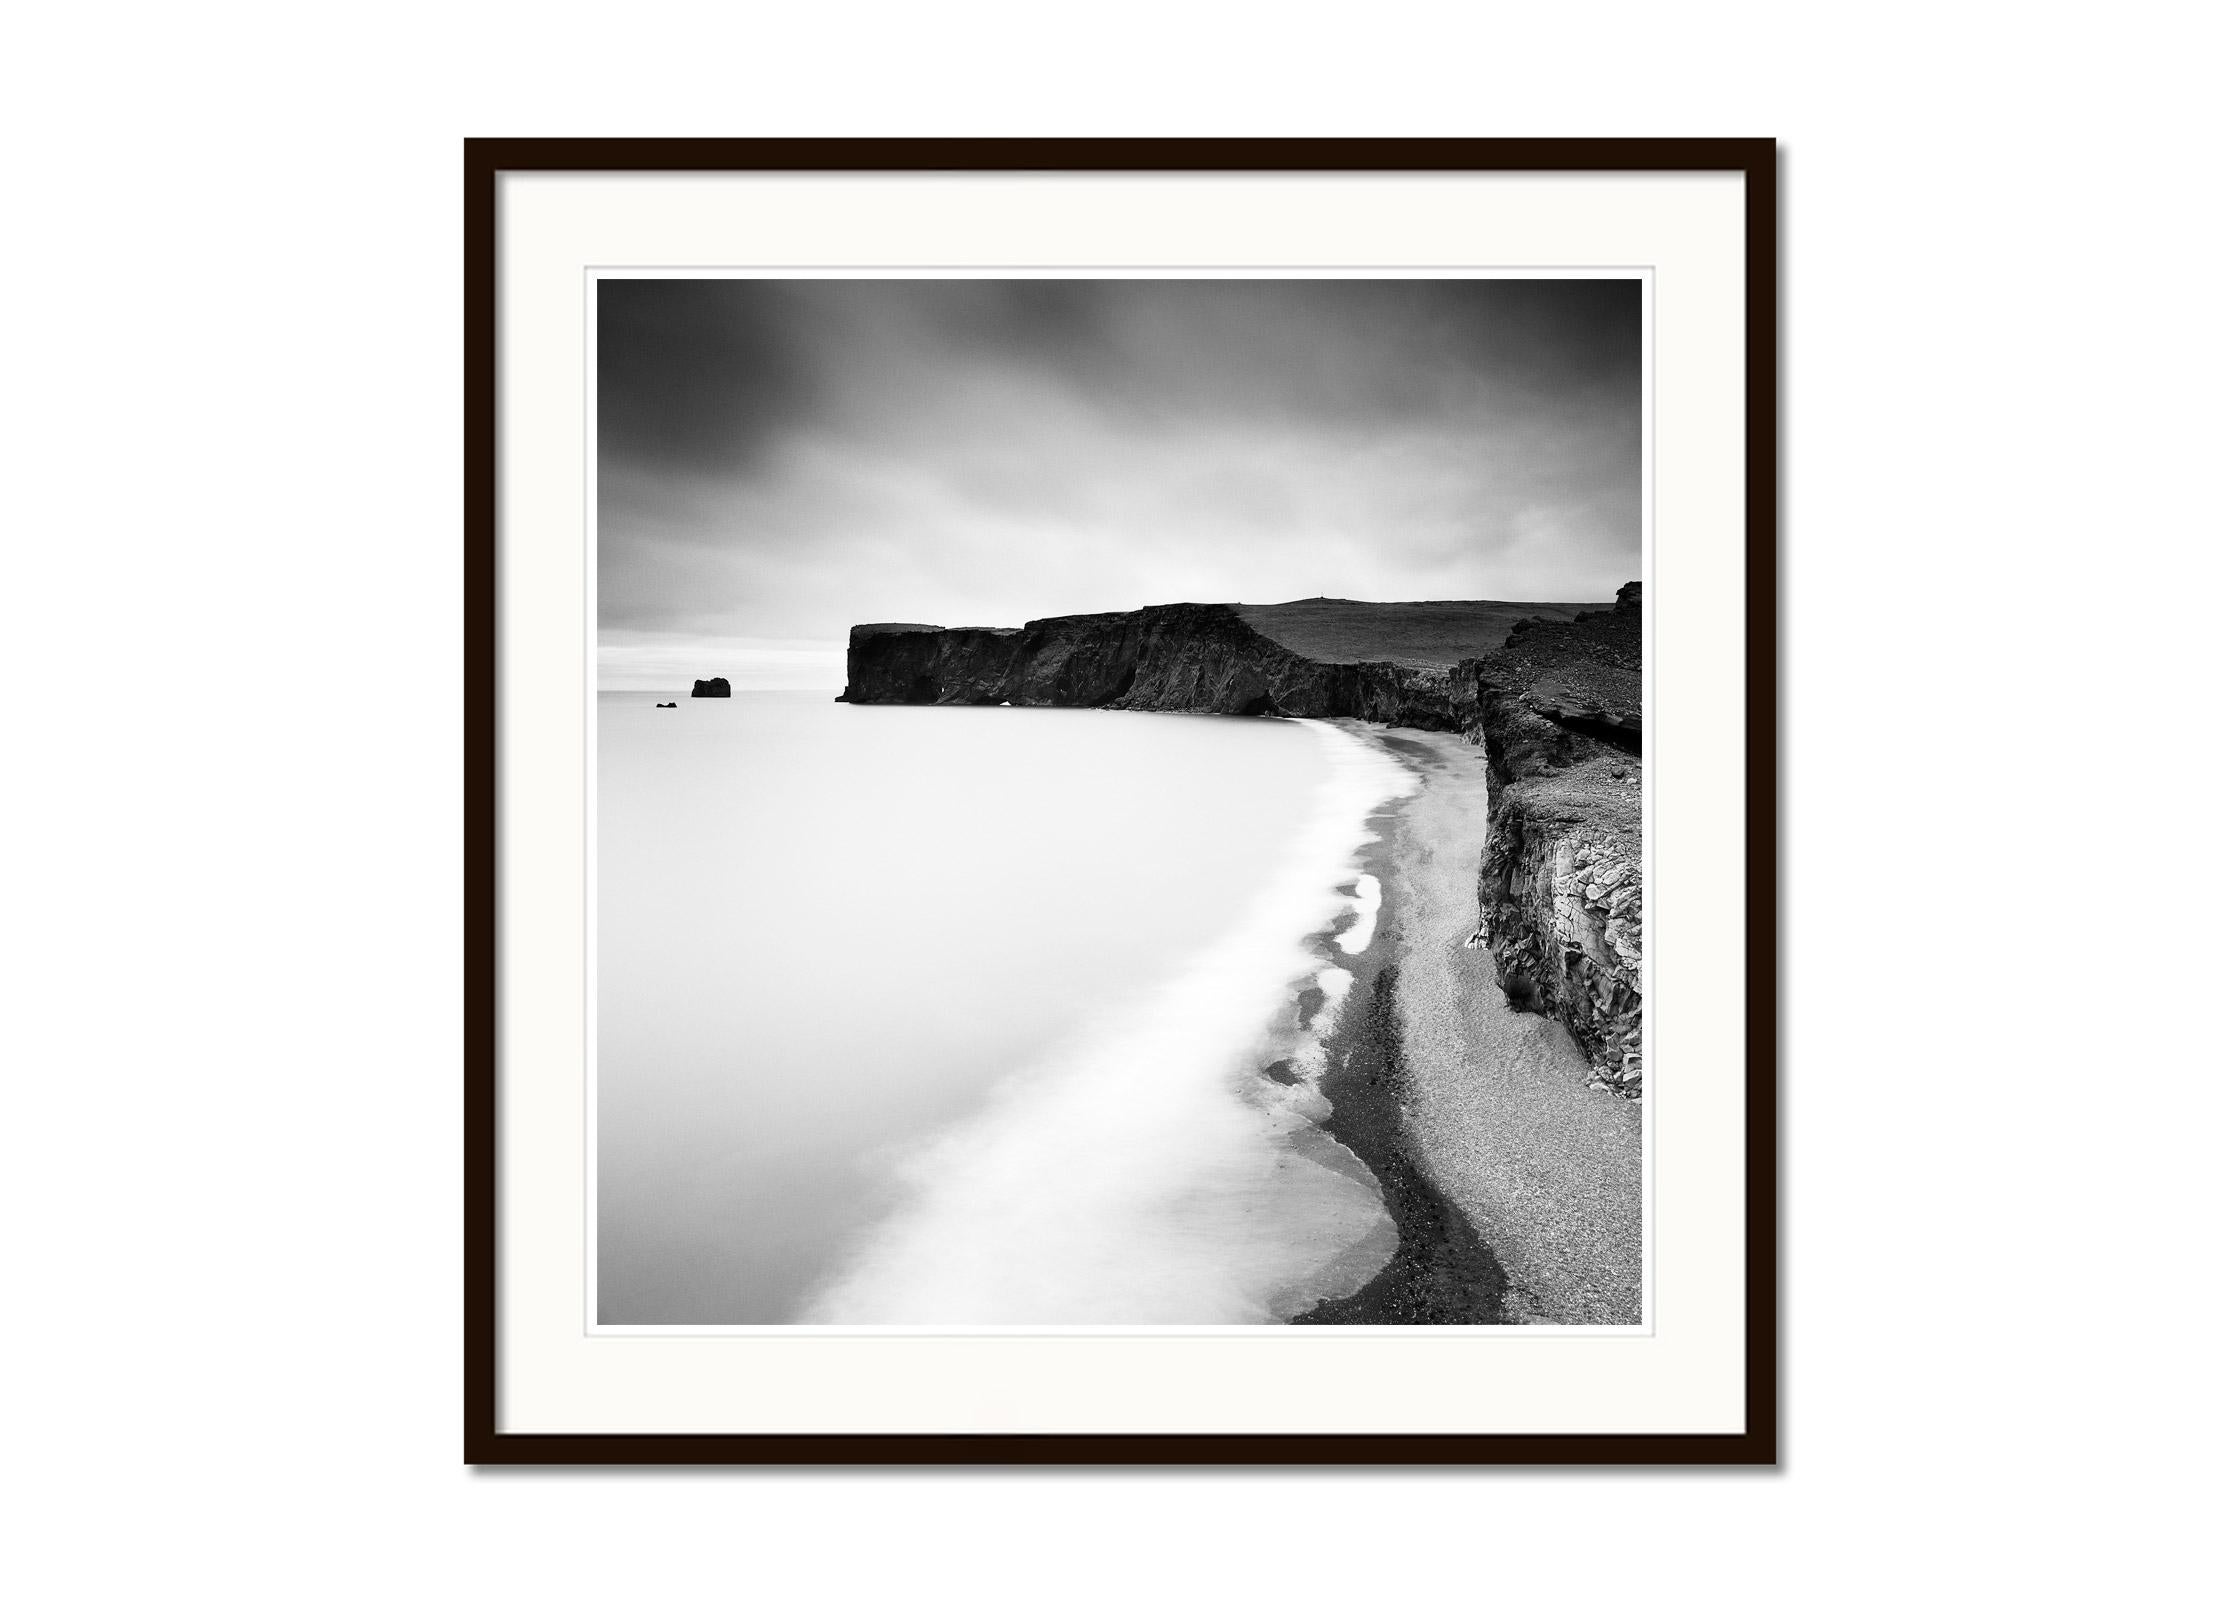 Detached Island, coast, Iceland, black and white photography, fine art landscape - Contemporary Photograph by Gerald Berghammer